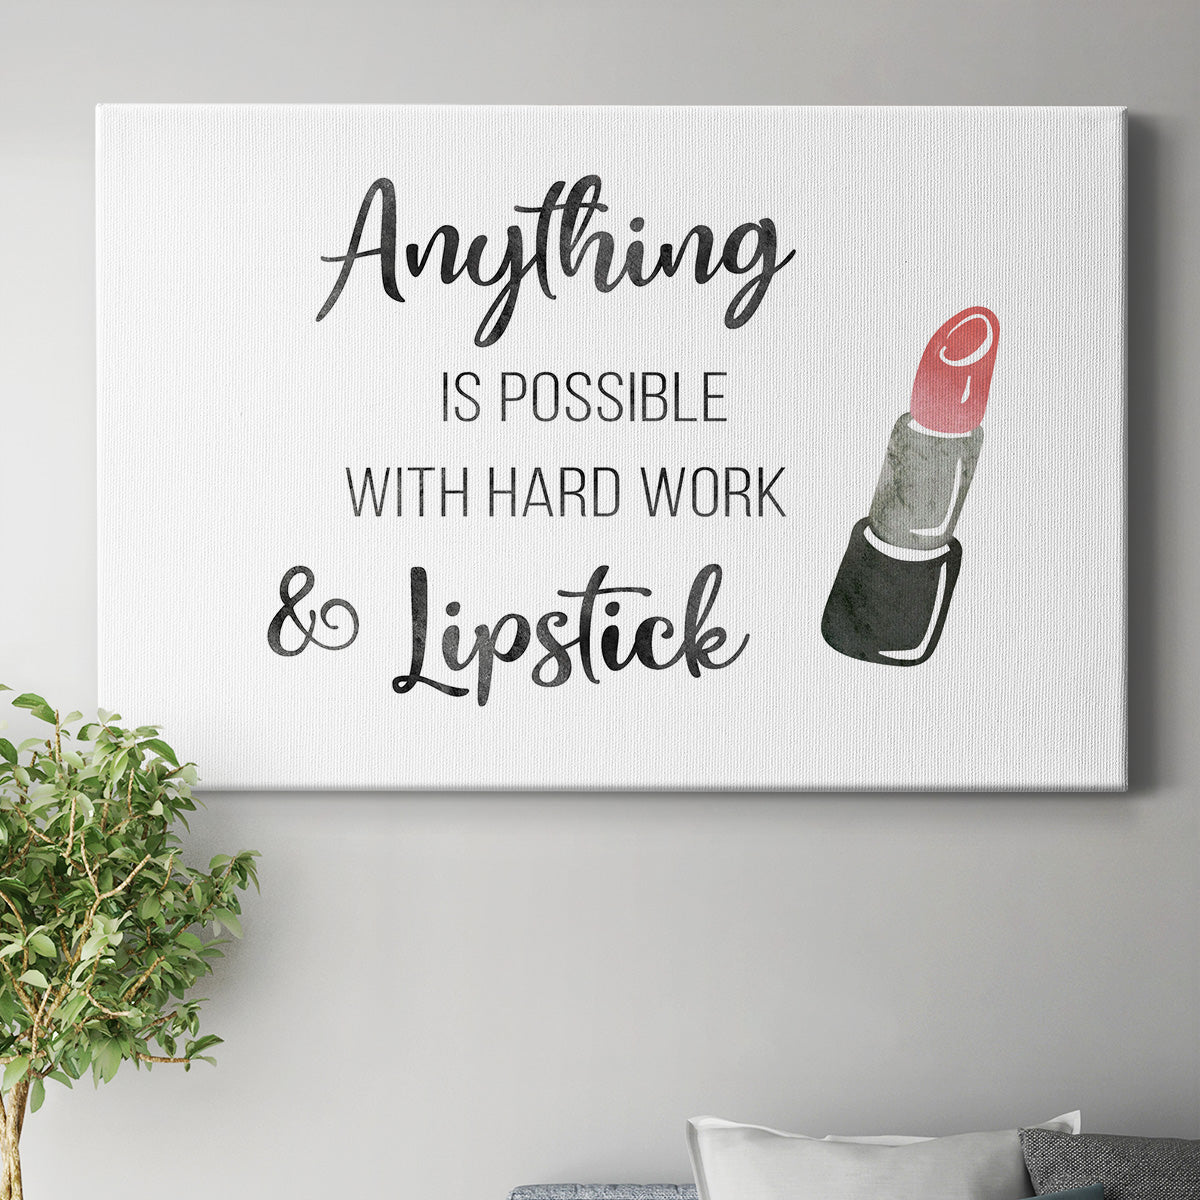 Hard Work and Lipstick Premium Gallery Wrapped Canvas - Ready to Hang